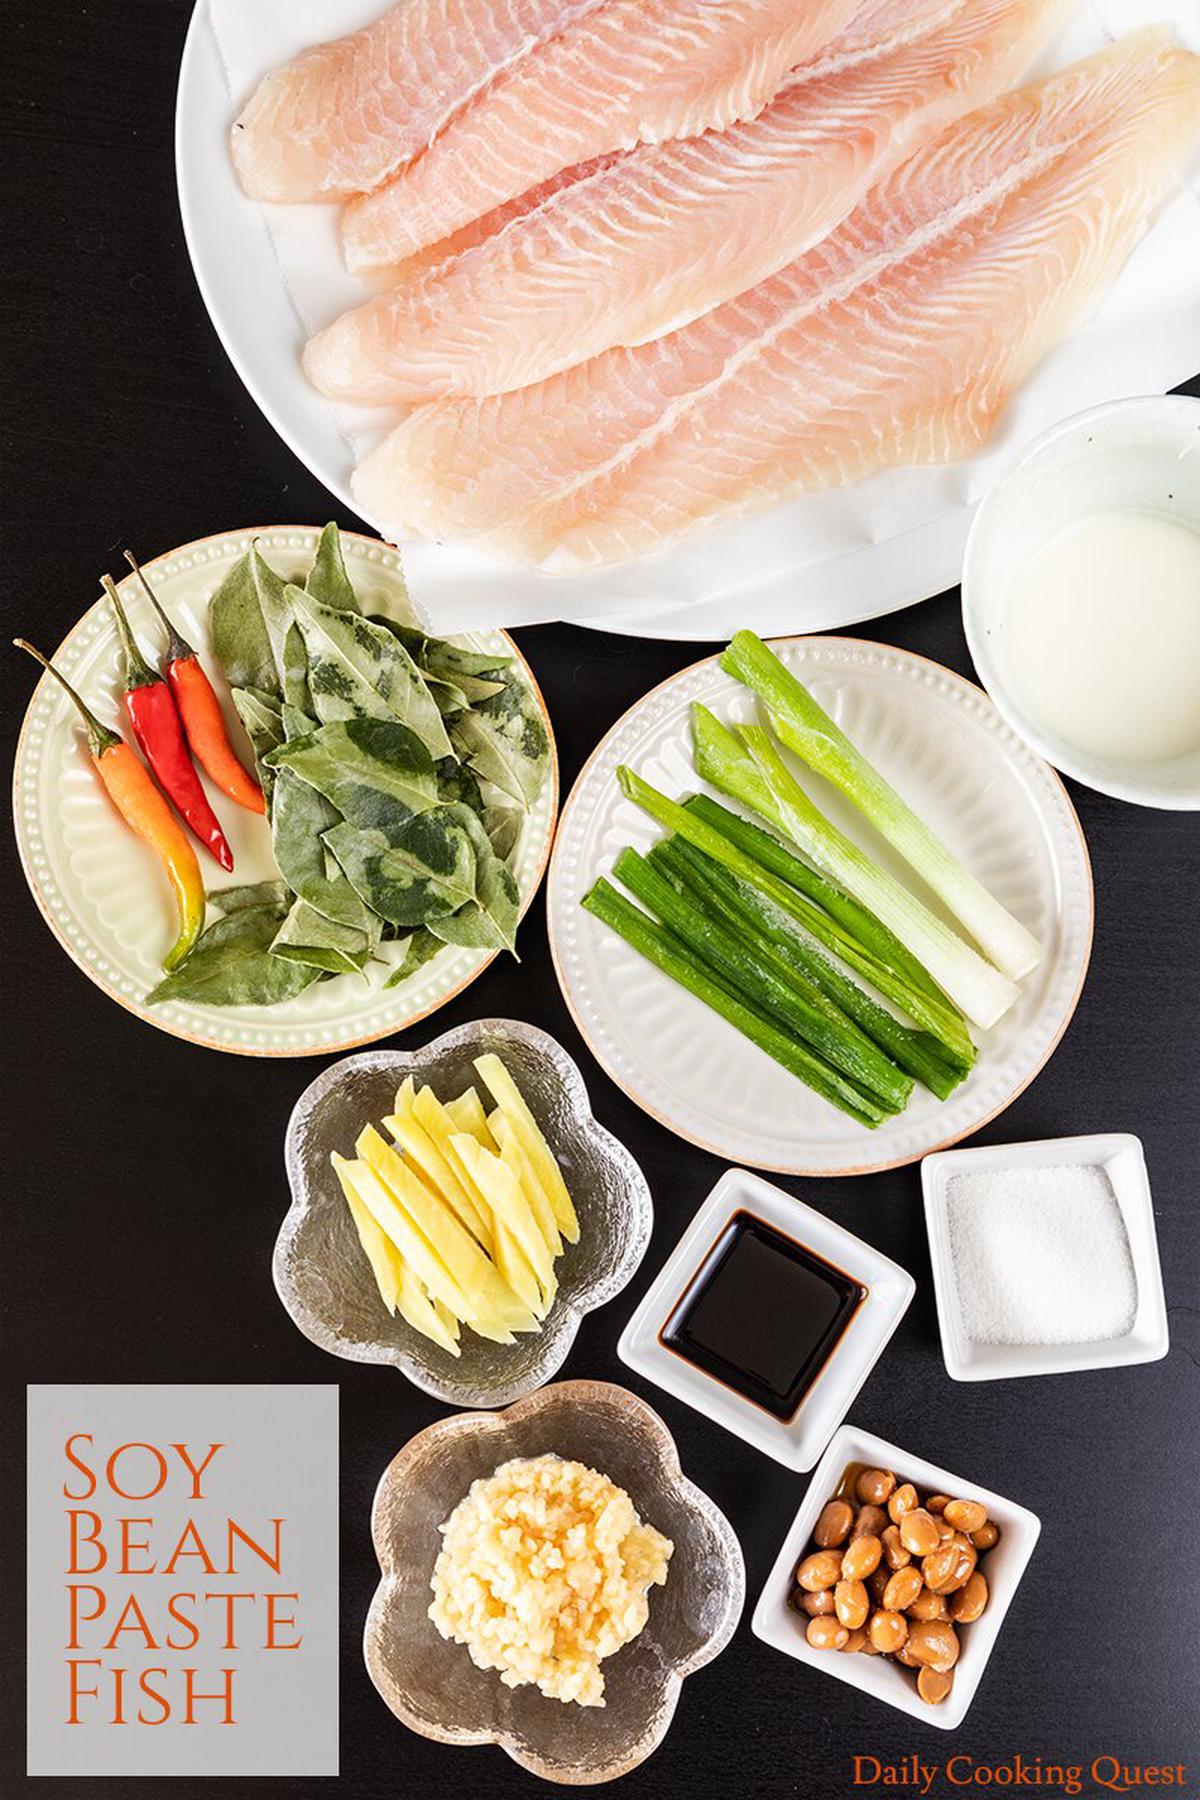 Ingredients for Soy Bean Paste Fish